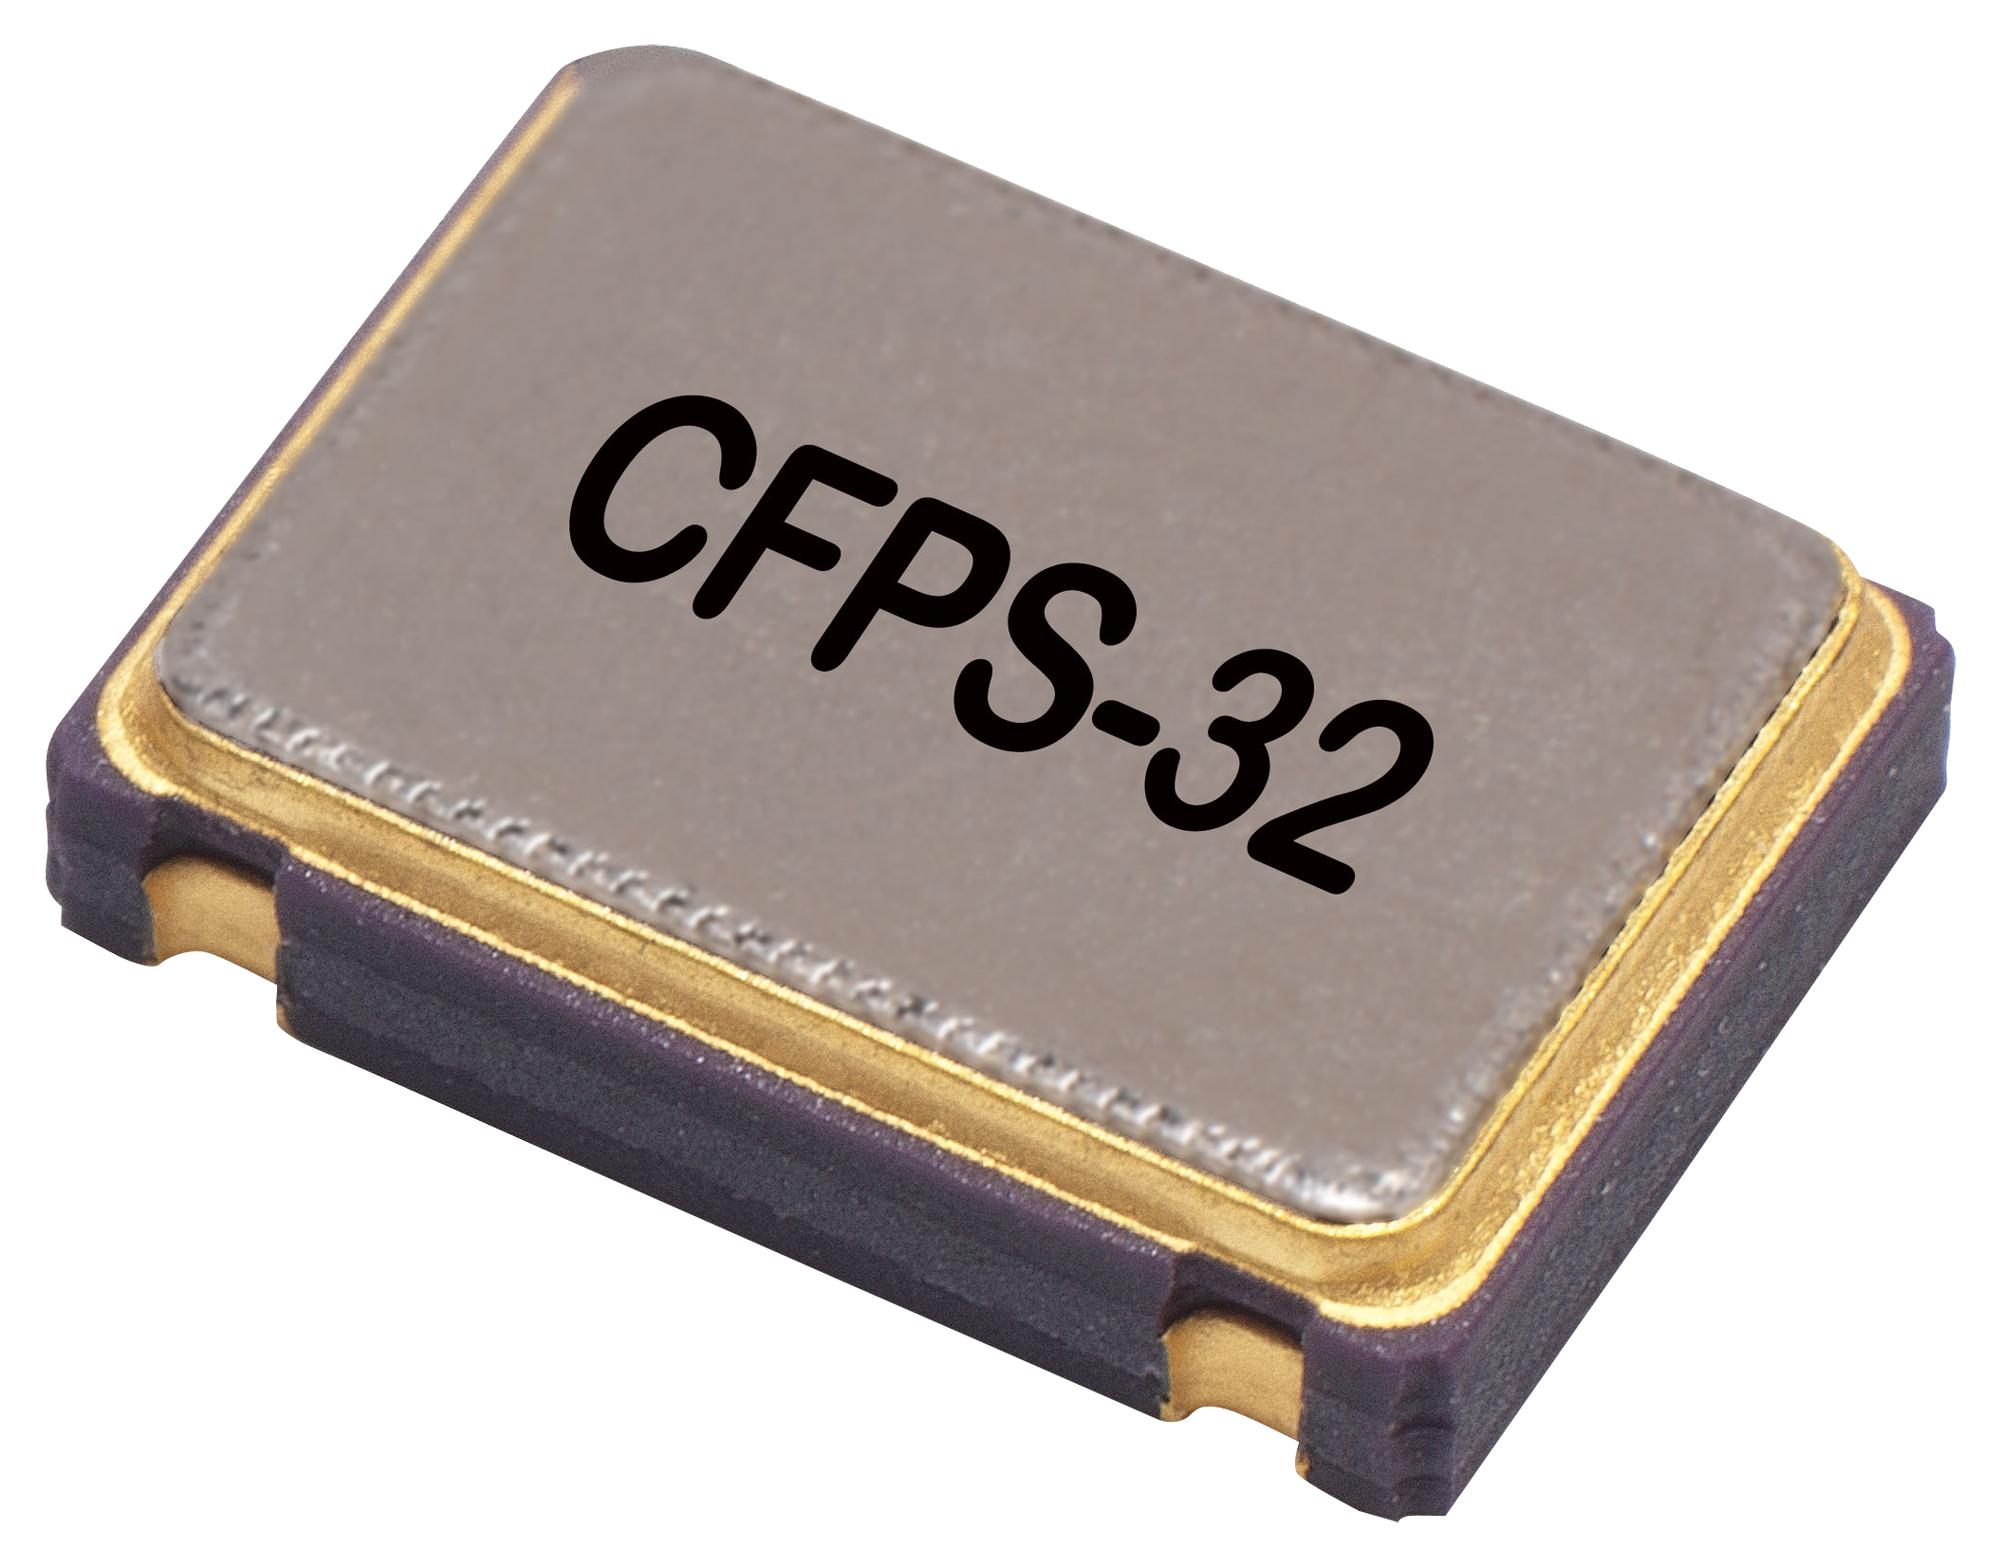 LFSPXO009615 CRYSTAL OSCILLATOR, SMD, 64MHZ IQD FREQUENCY PRODUCTS